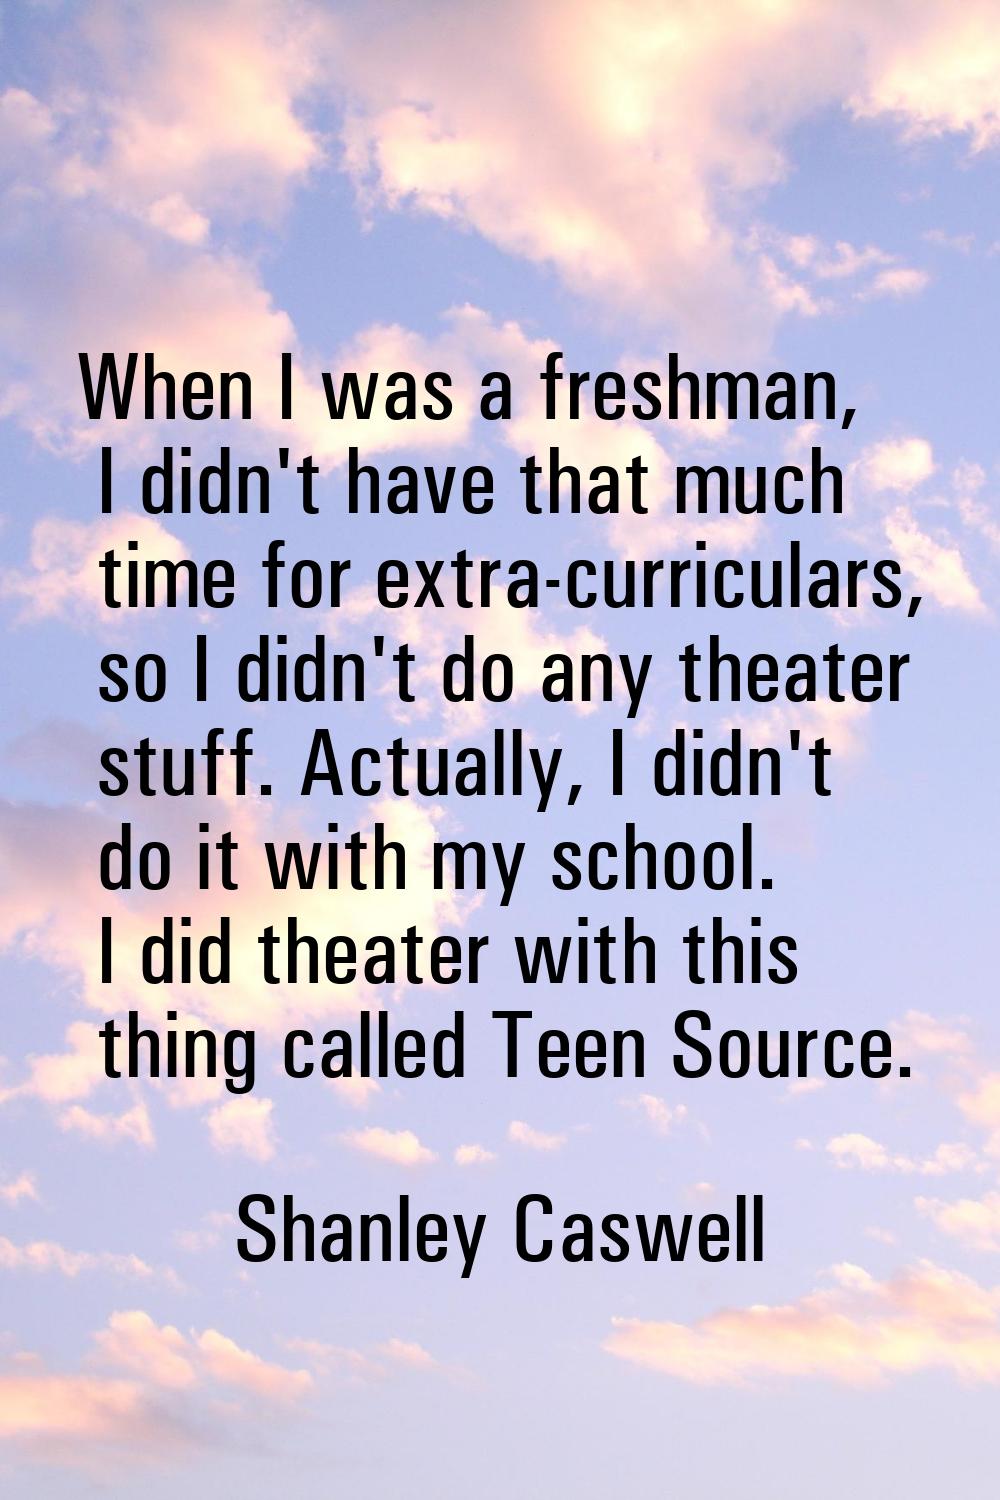 When I was a freshman, I didn't have that much time for extra-curriculars, so I didn't do any theat